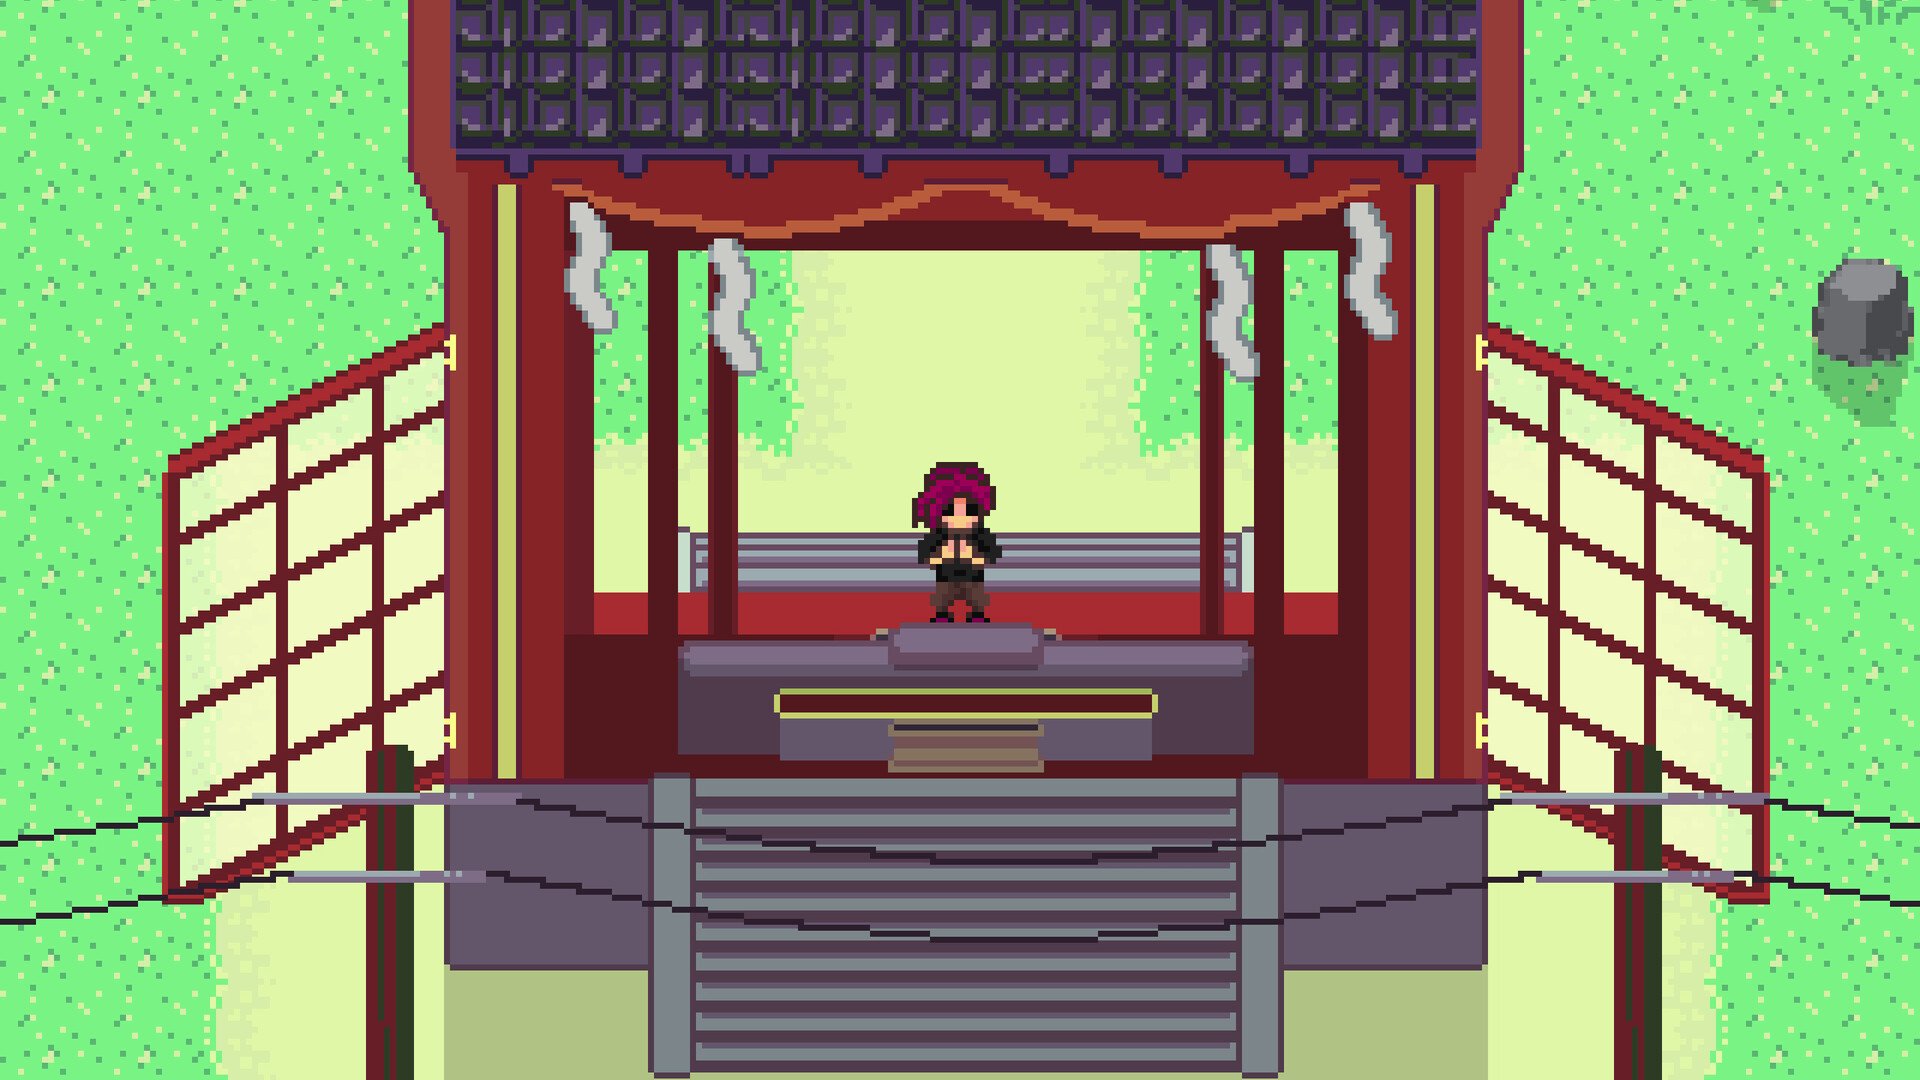 Learn Japanese Within a Pixelated RPG in Kagami, Coming Soon